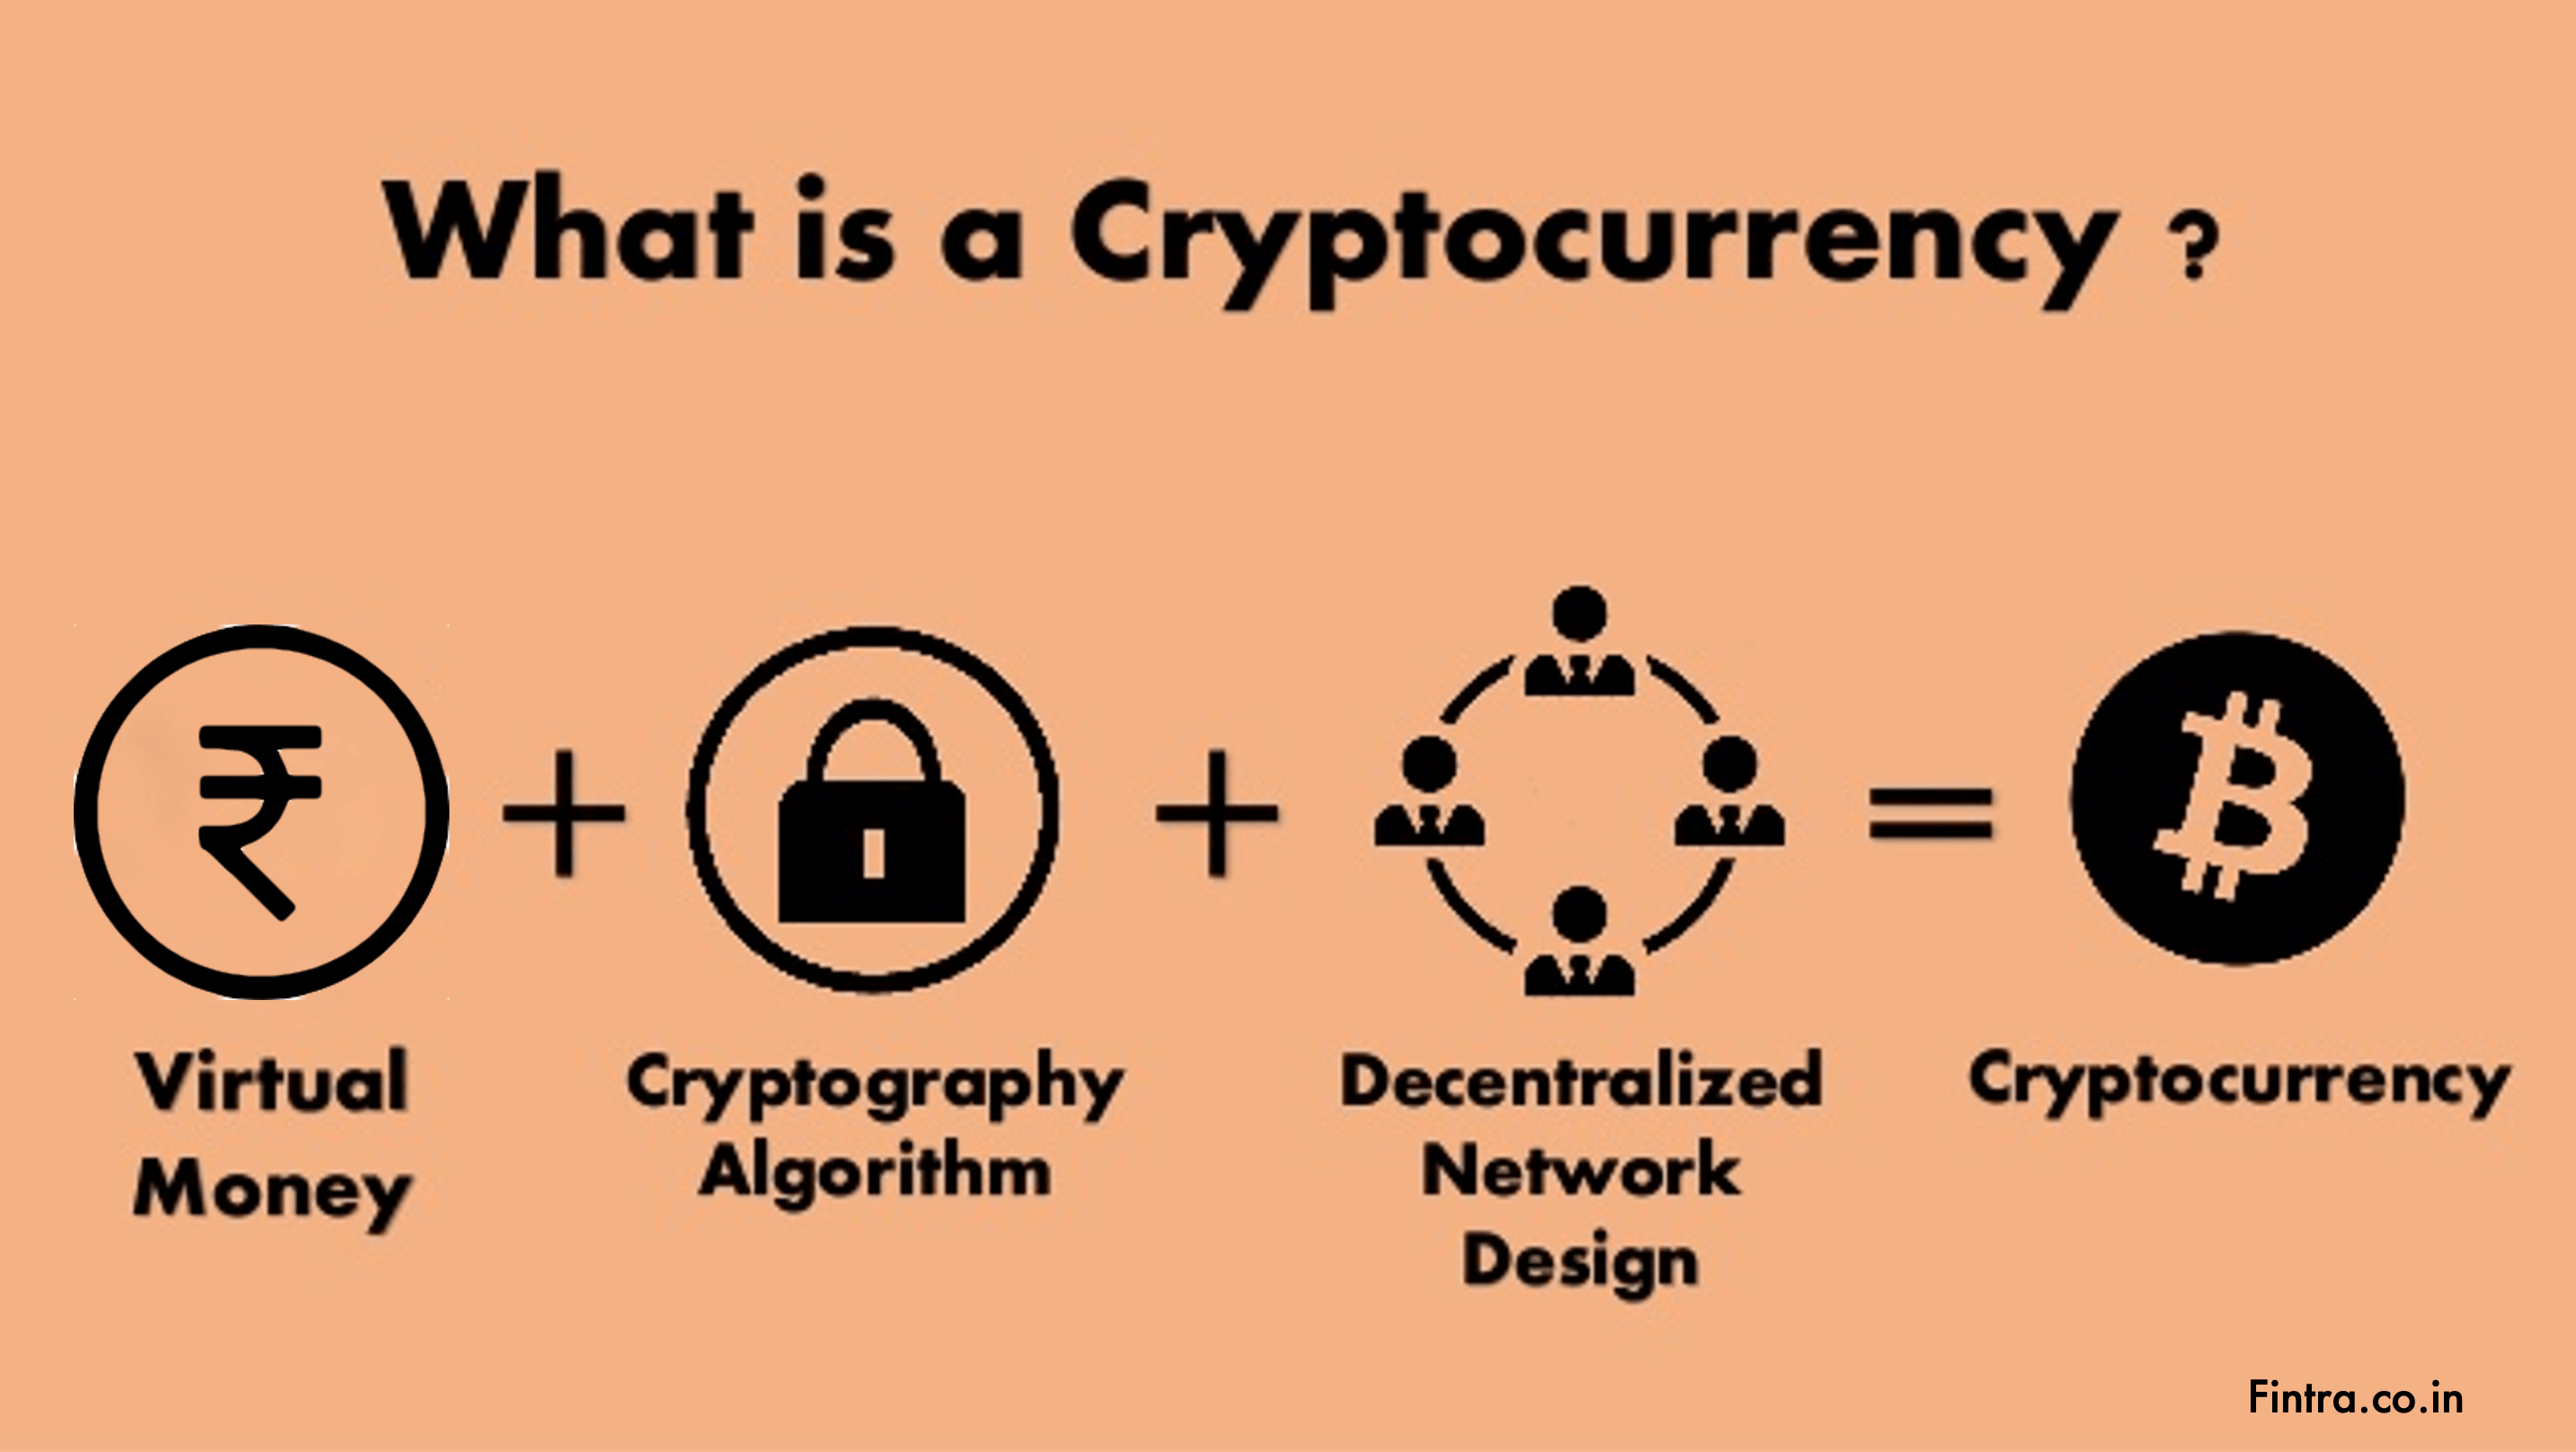 What is cryptocurrency? Bitcoins? Blockchain?